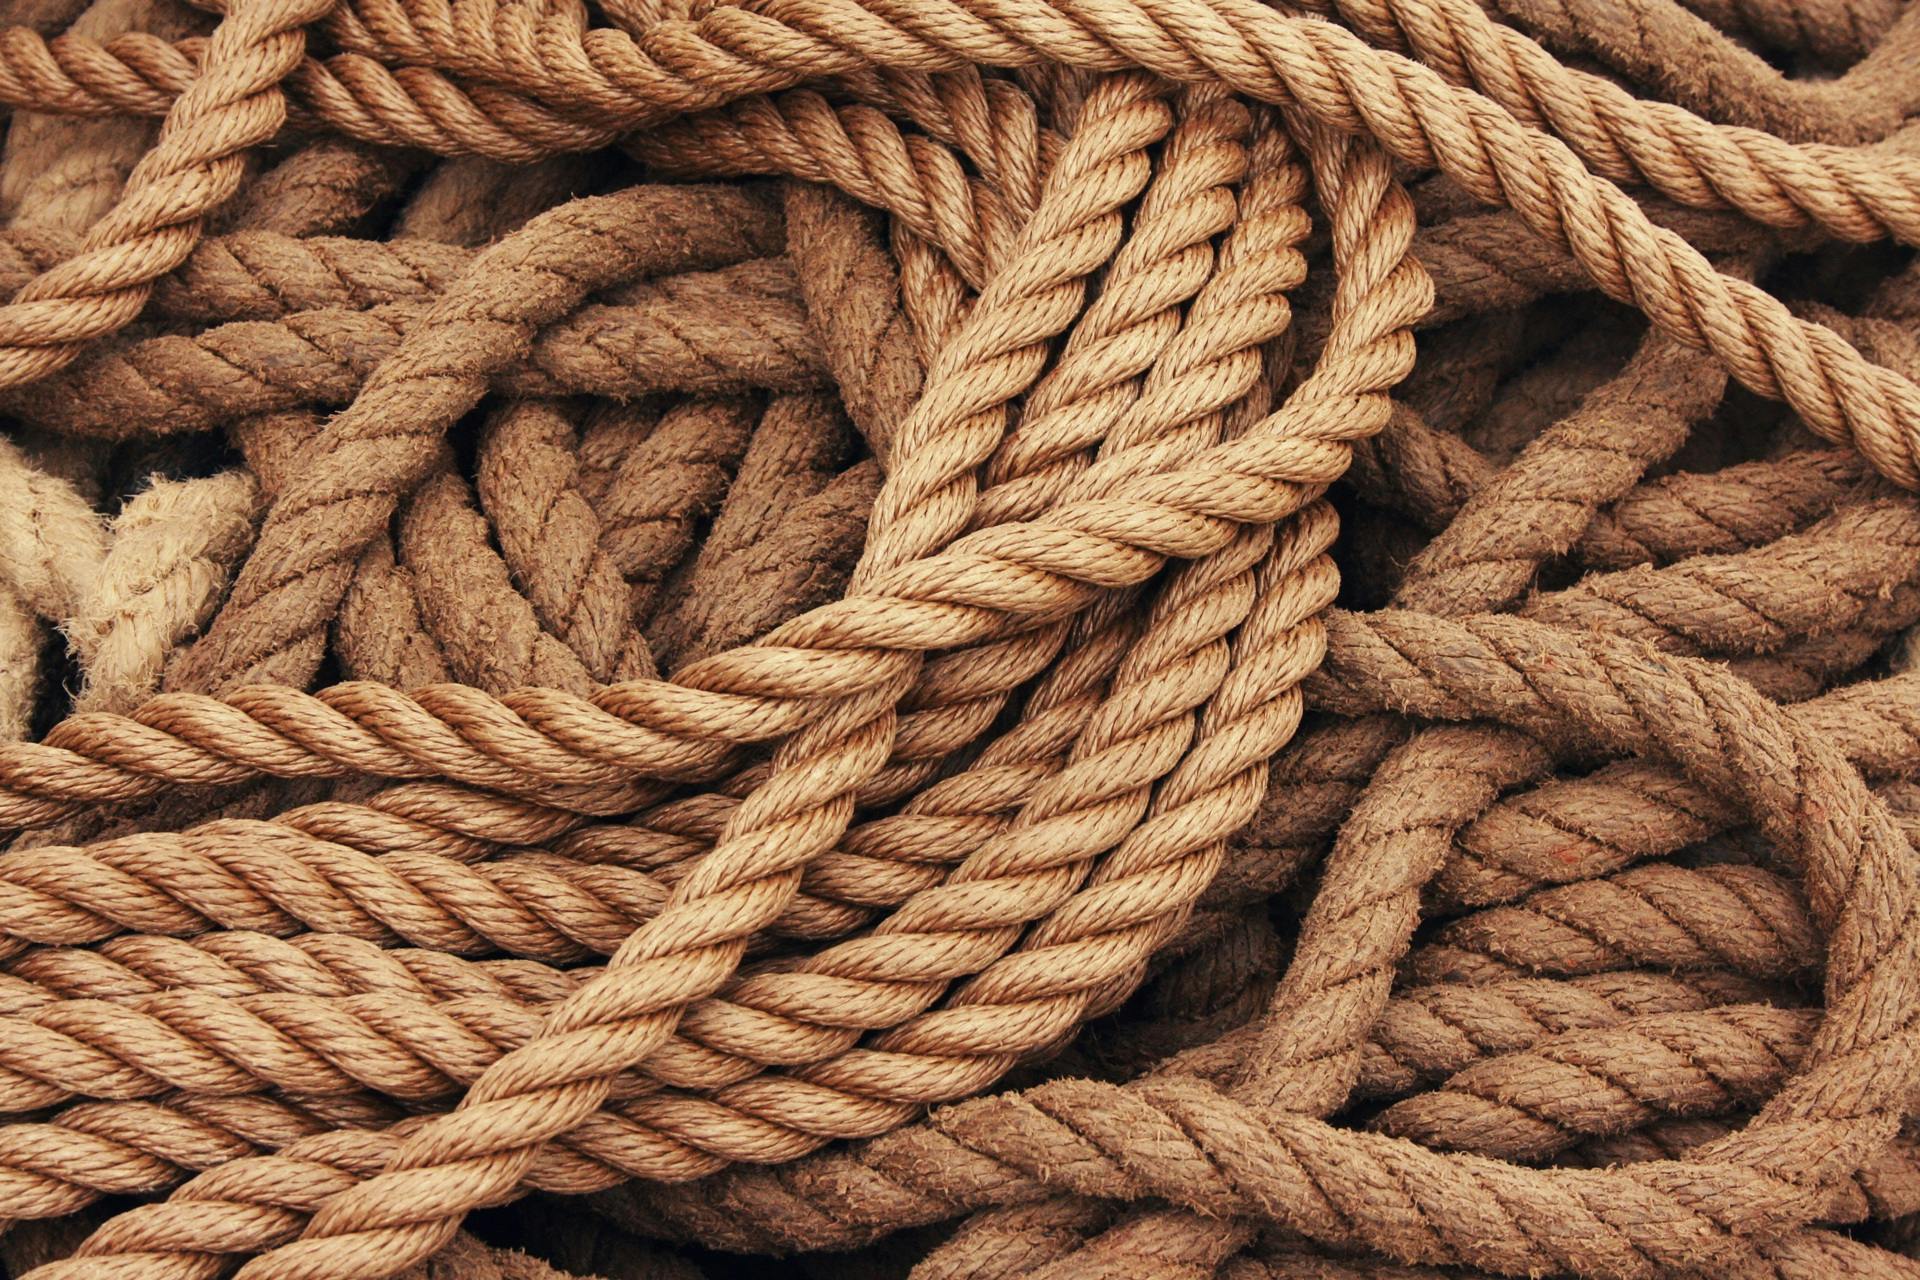 Free Images : rope, color, material, thread, textile, art, tightropes,  cords, climbing ropes, hawsers 4608x3072 - - 1346040 - Free stock photos -  PxHere